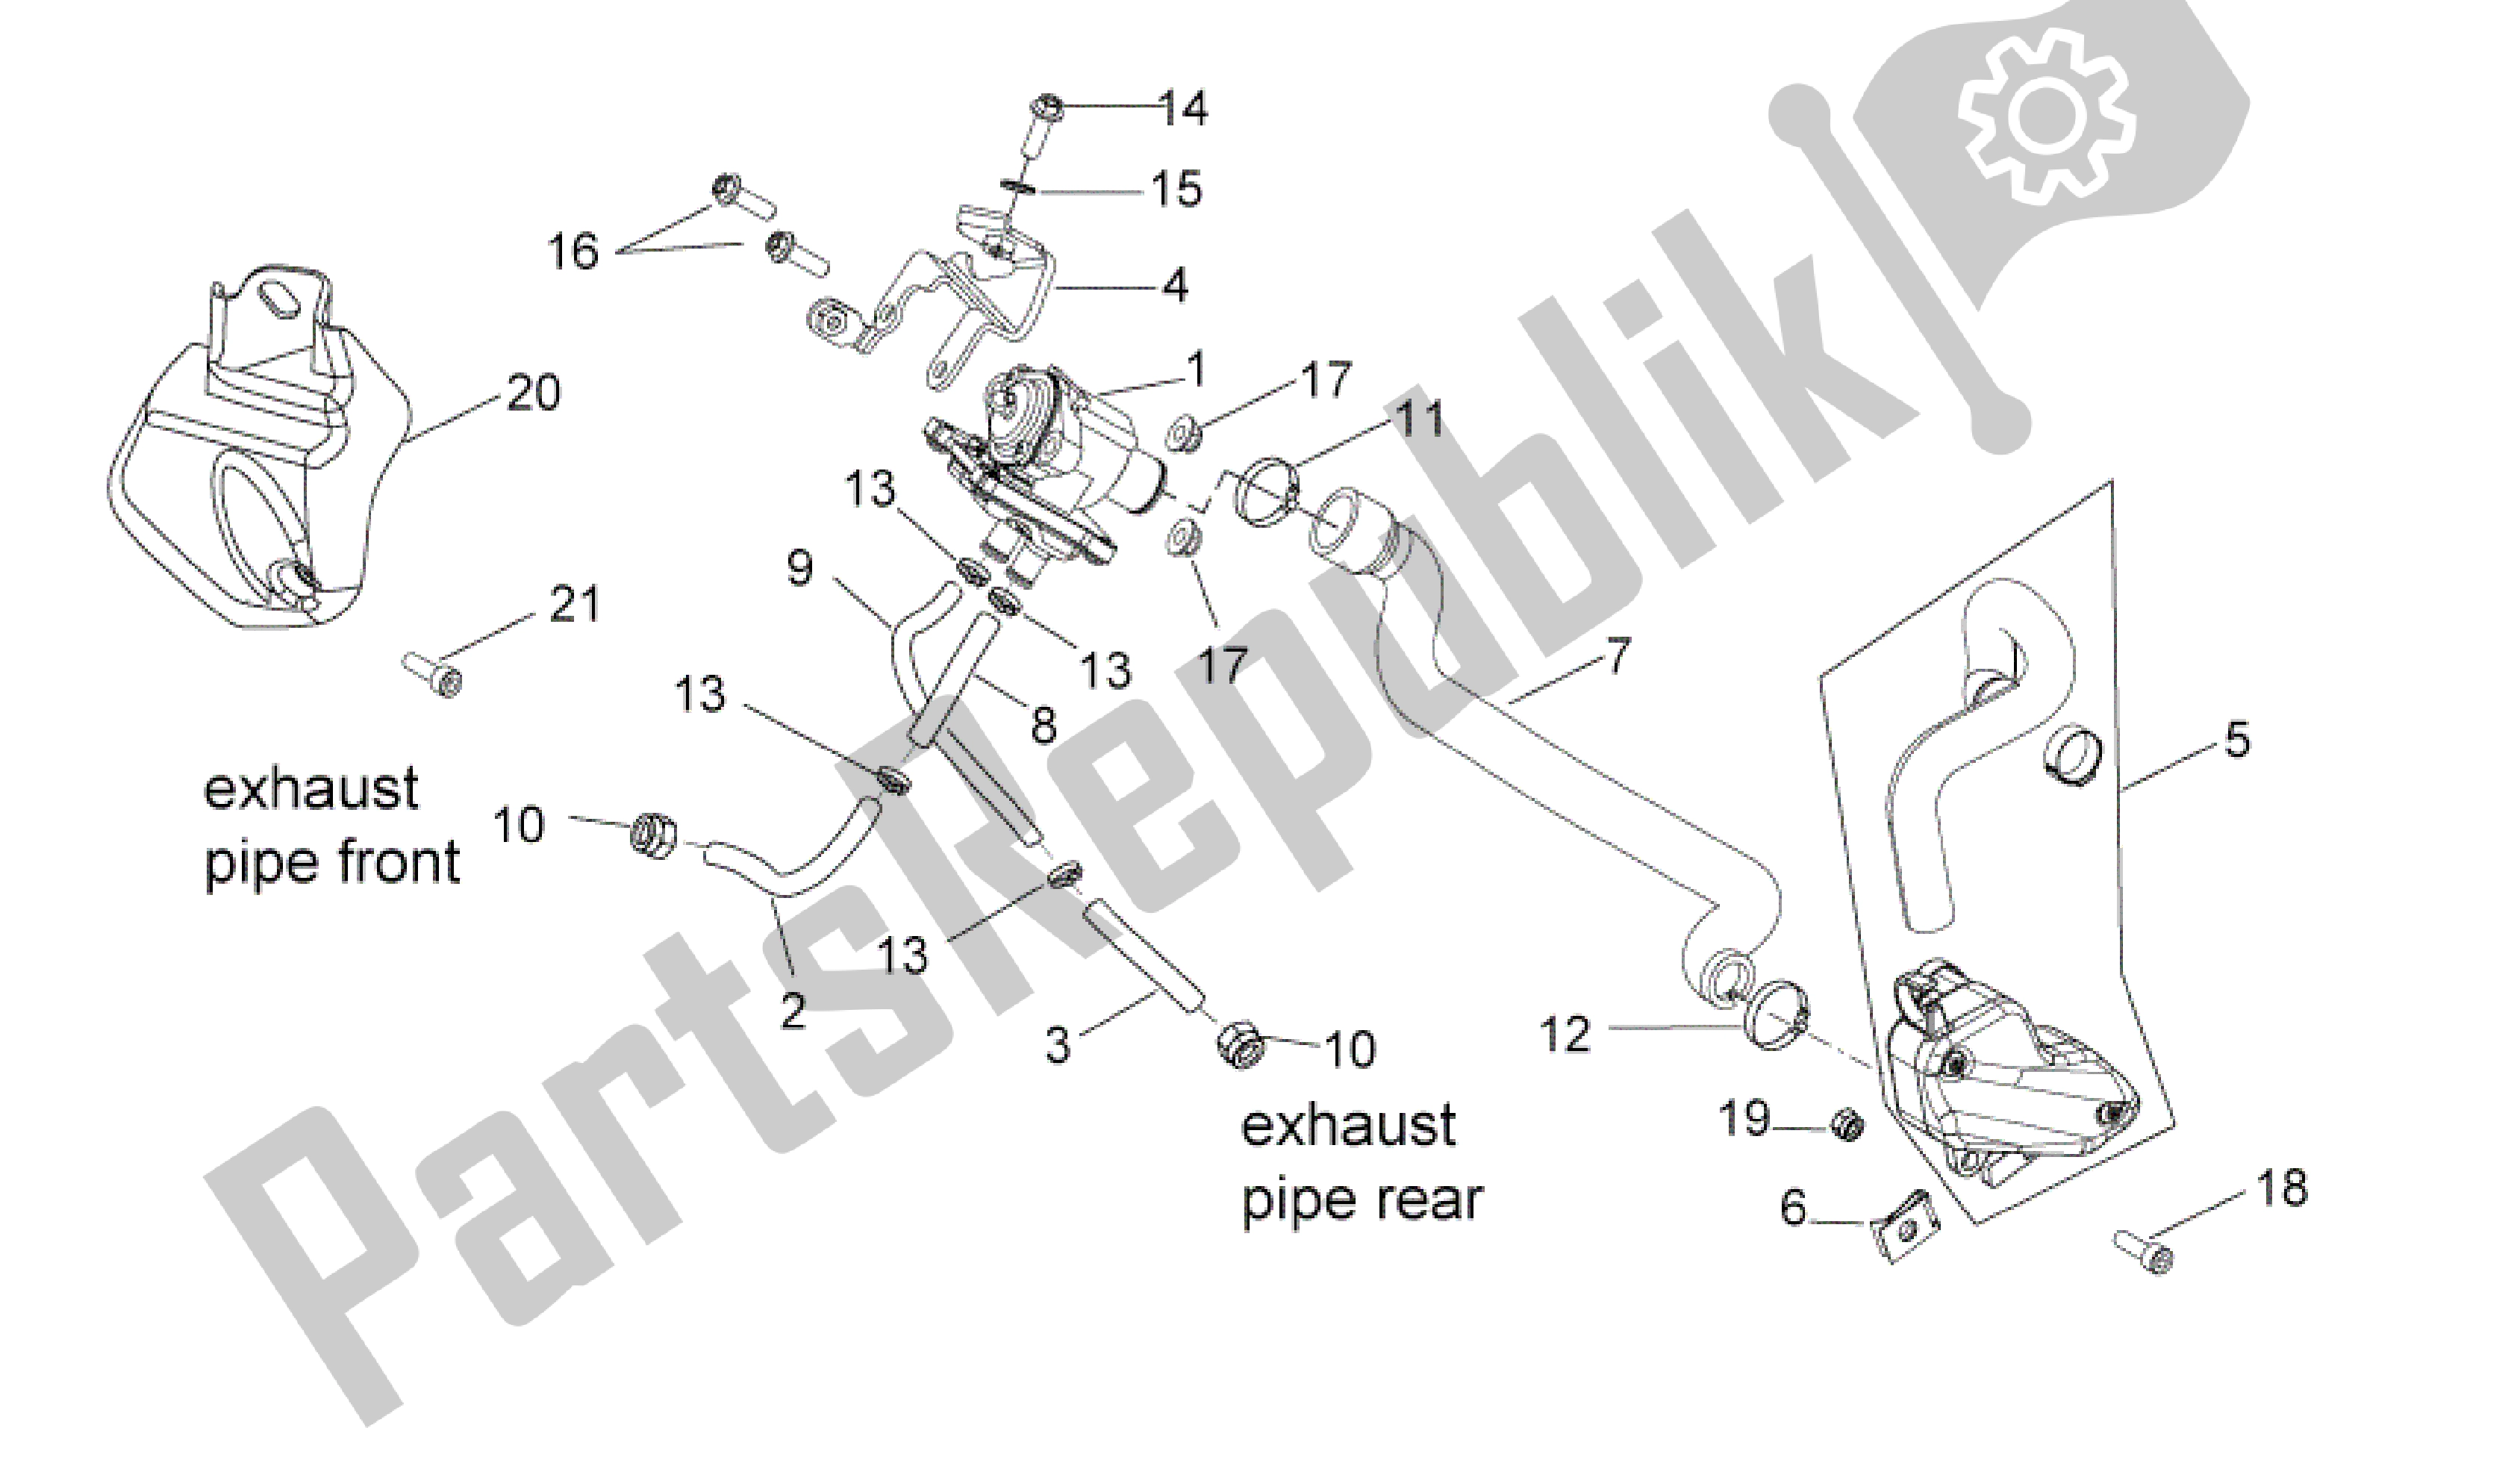 All parts for the Secondary Air of the Aprilia RXV 550 2009 - 2011